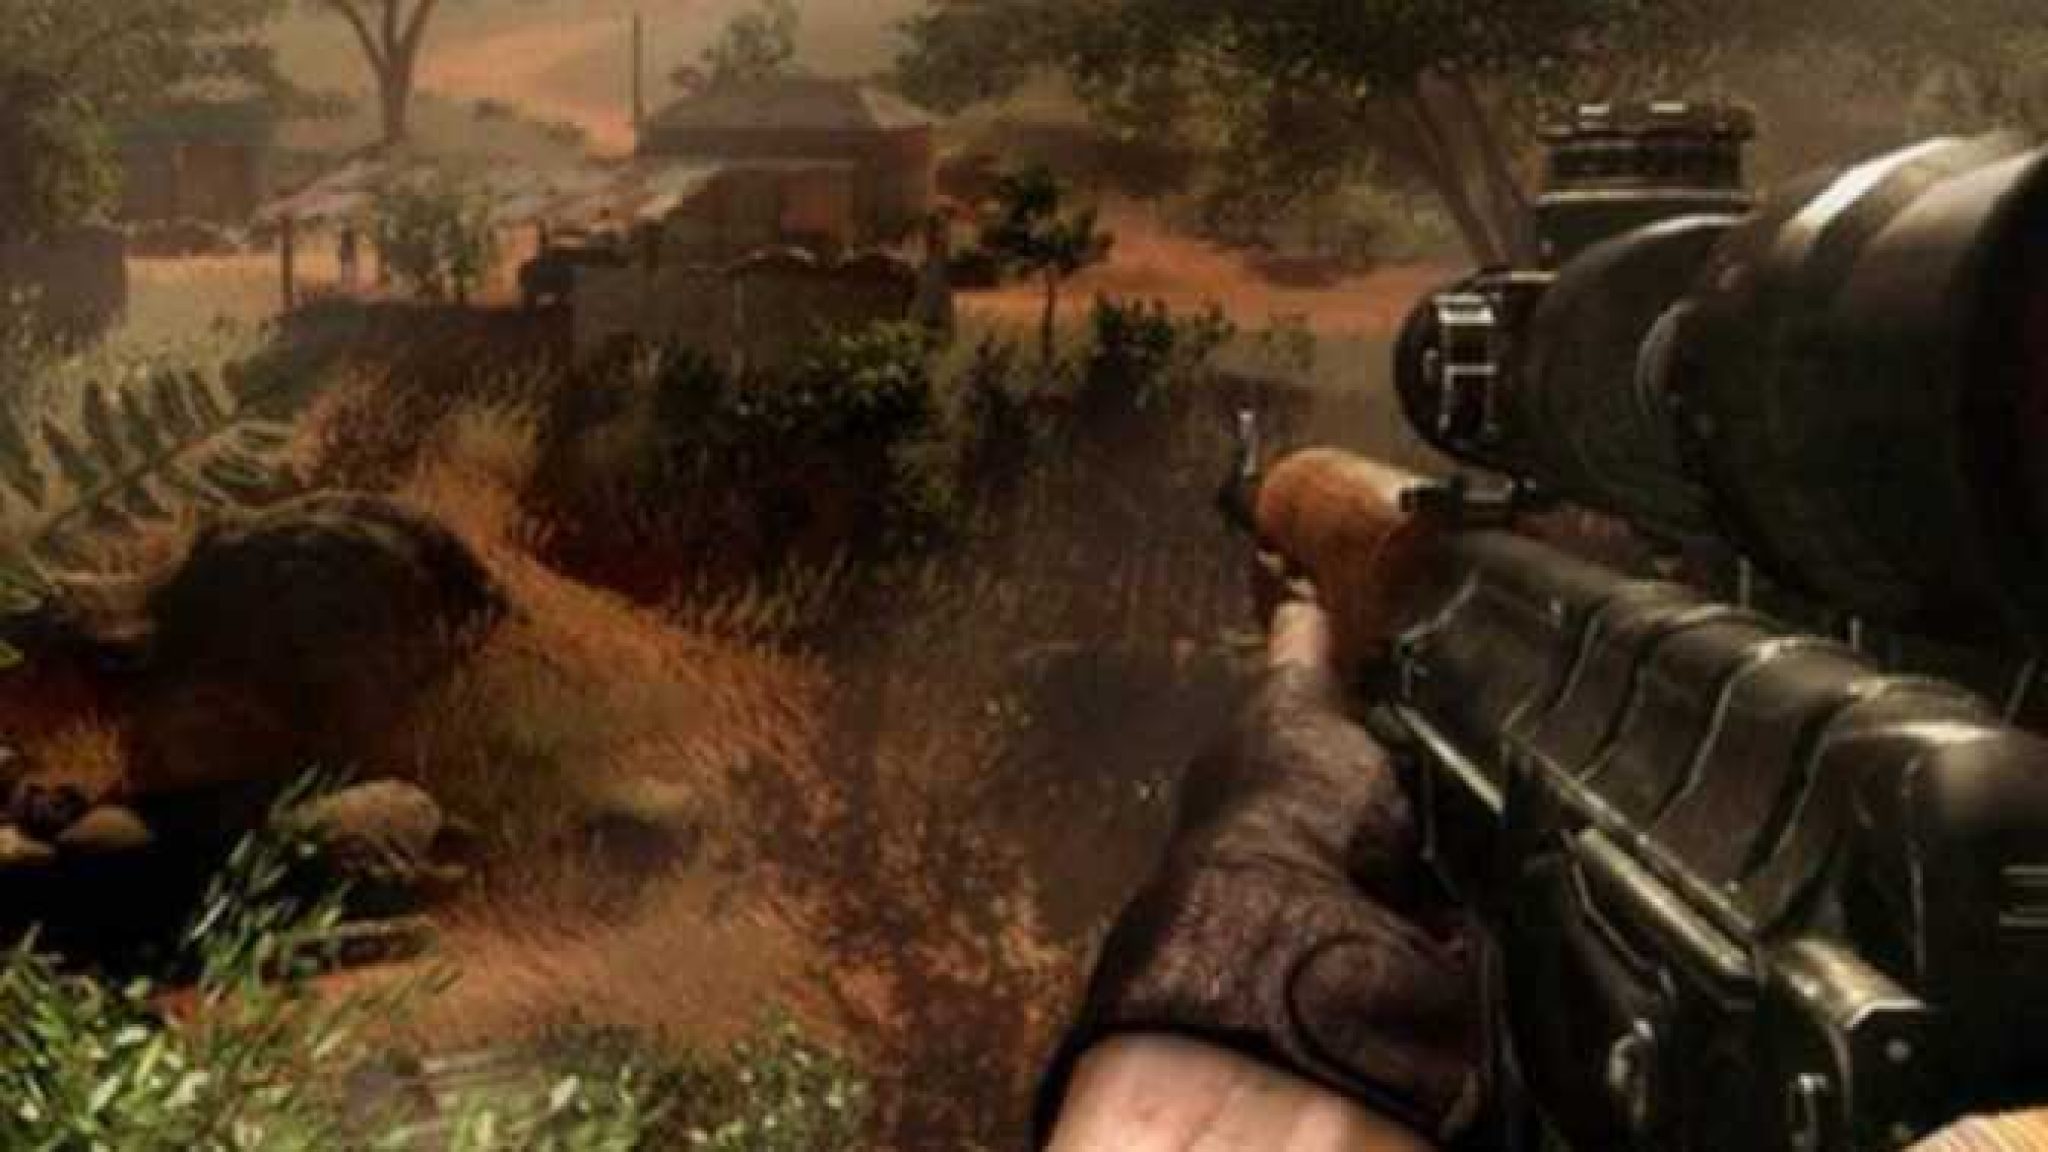 far cry 2 download for windows 10